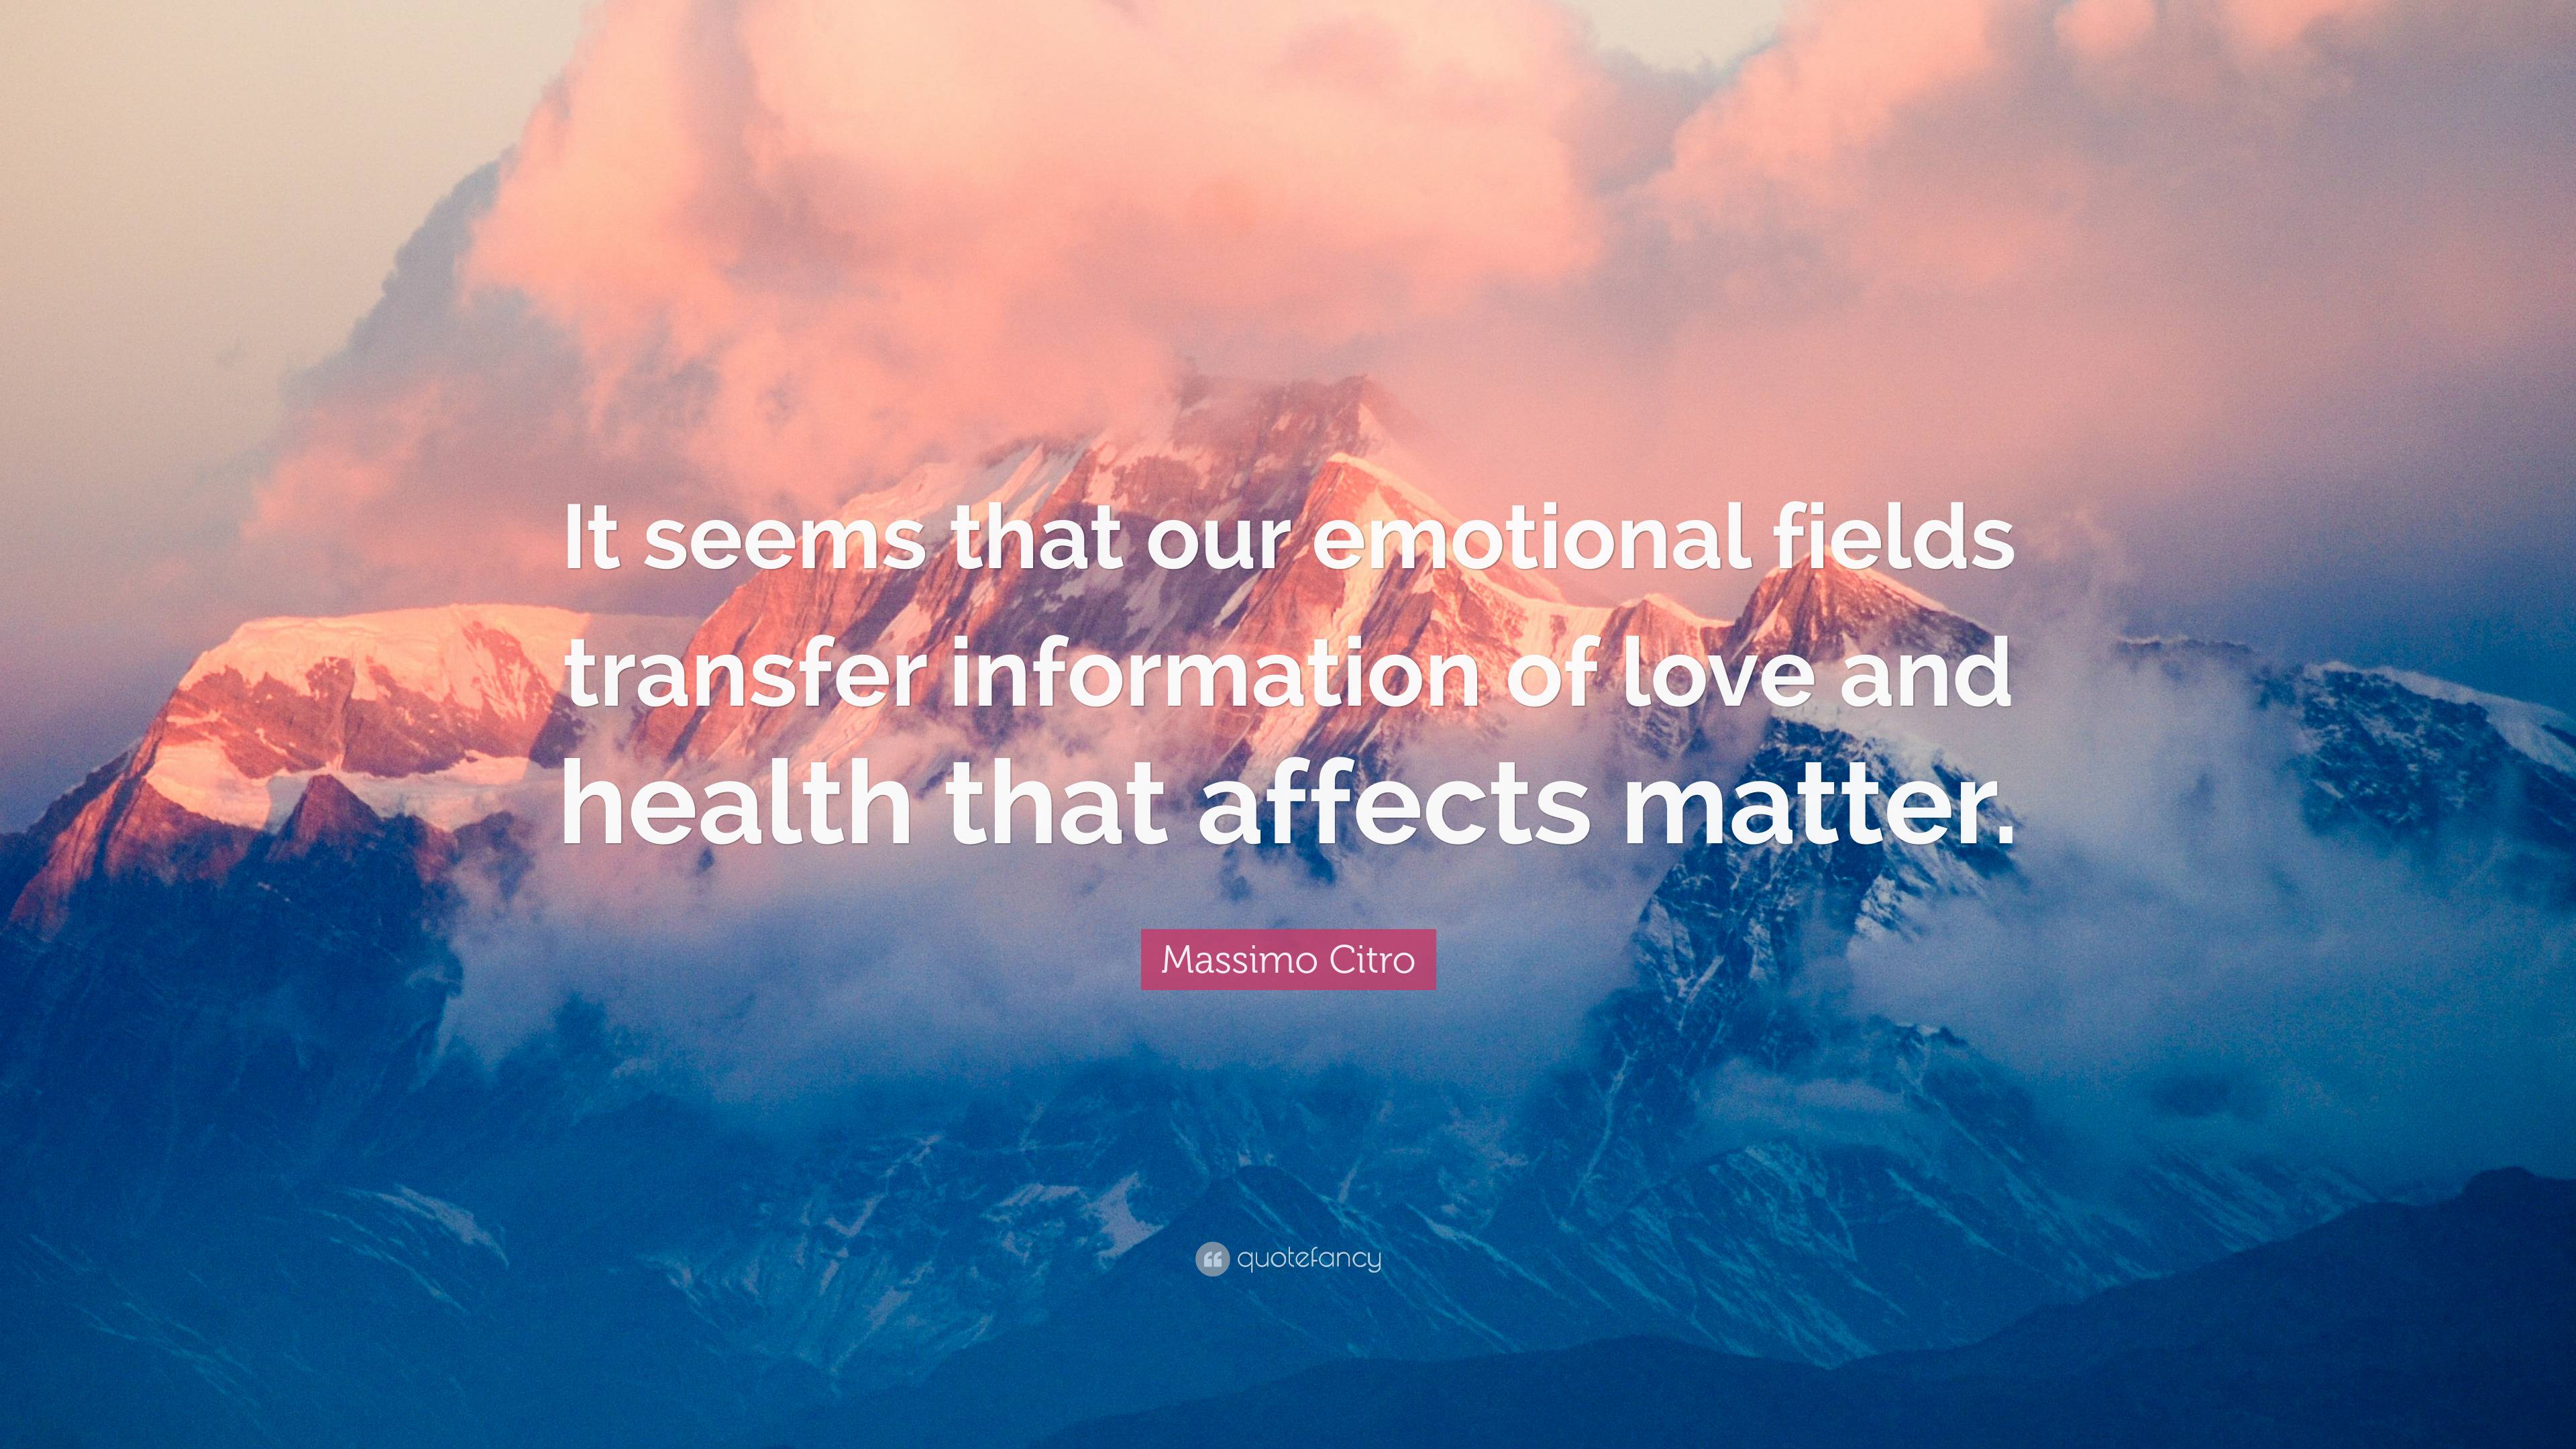 Massimo Citro Quote: “It seems that our emotional fields transfer ...